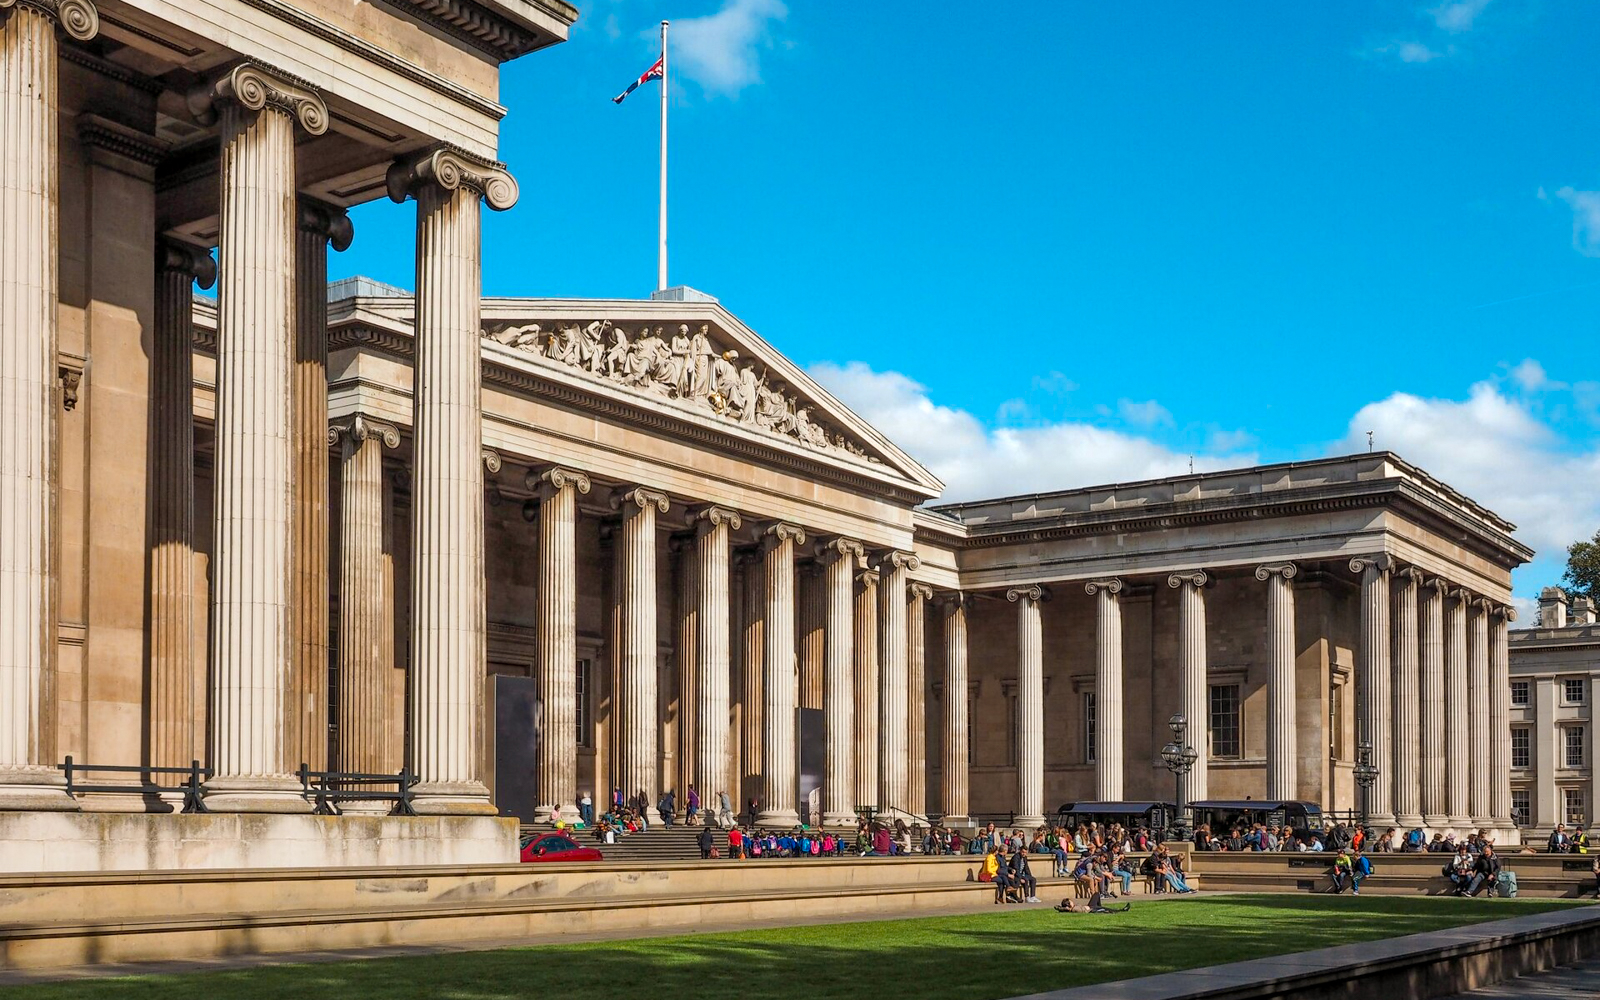 British Museum Asks Public To Help Recover About 2,000 Stolen Artifacts